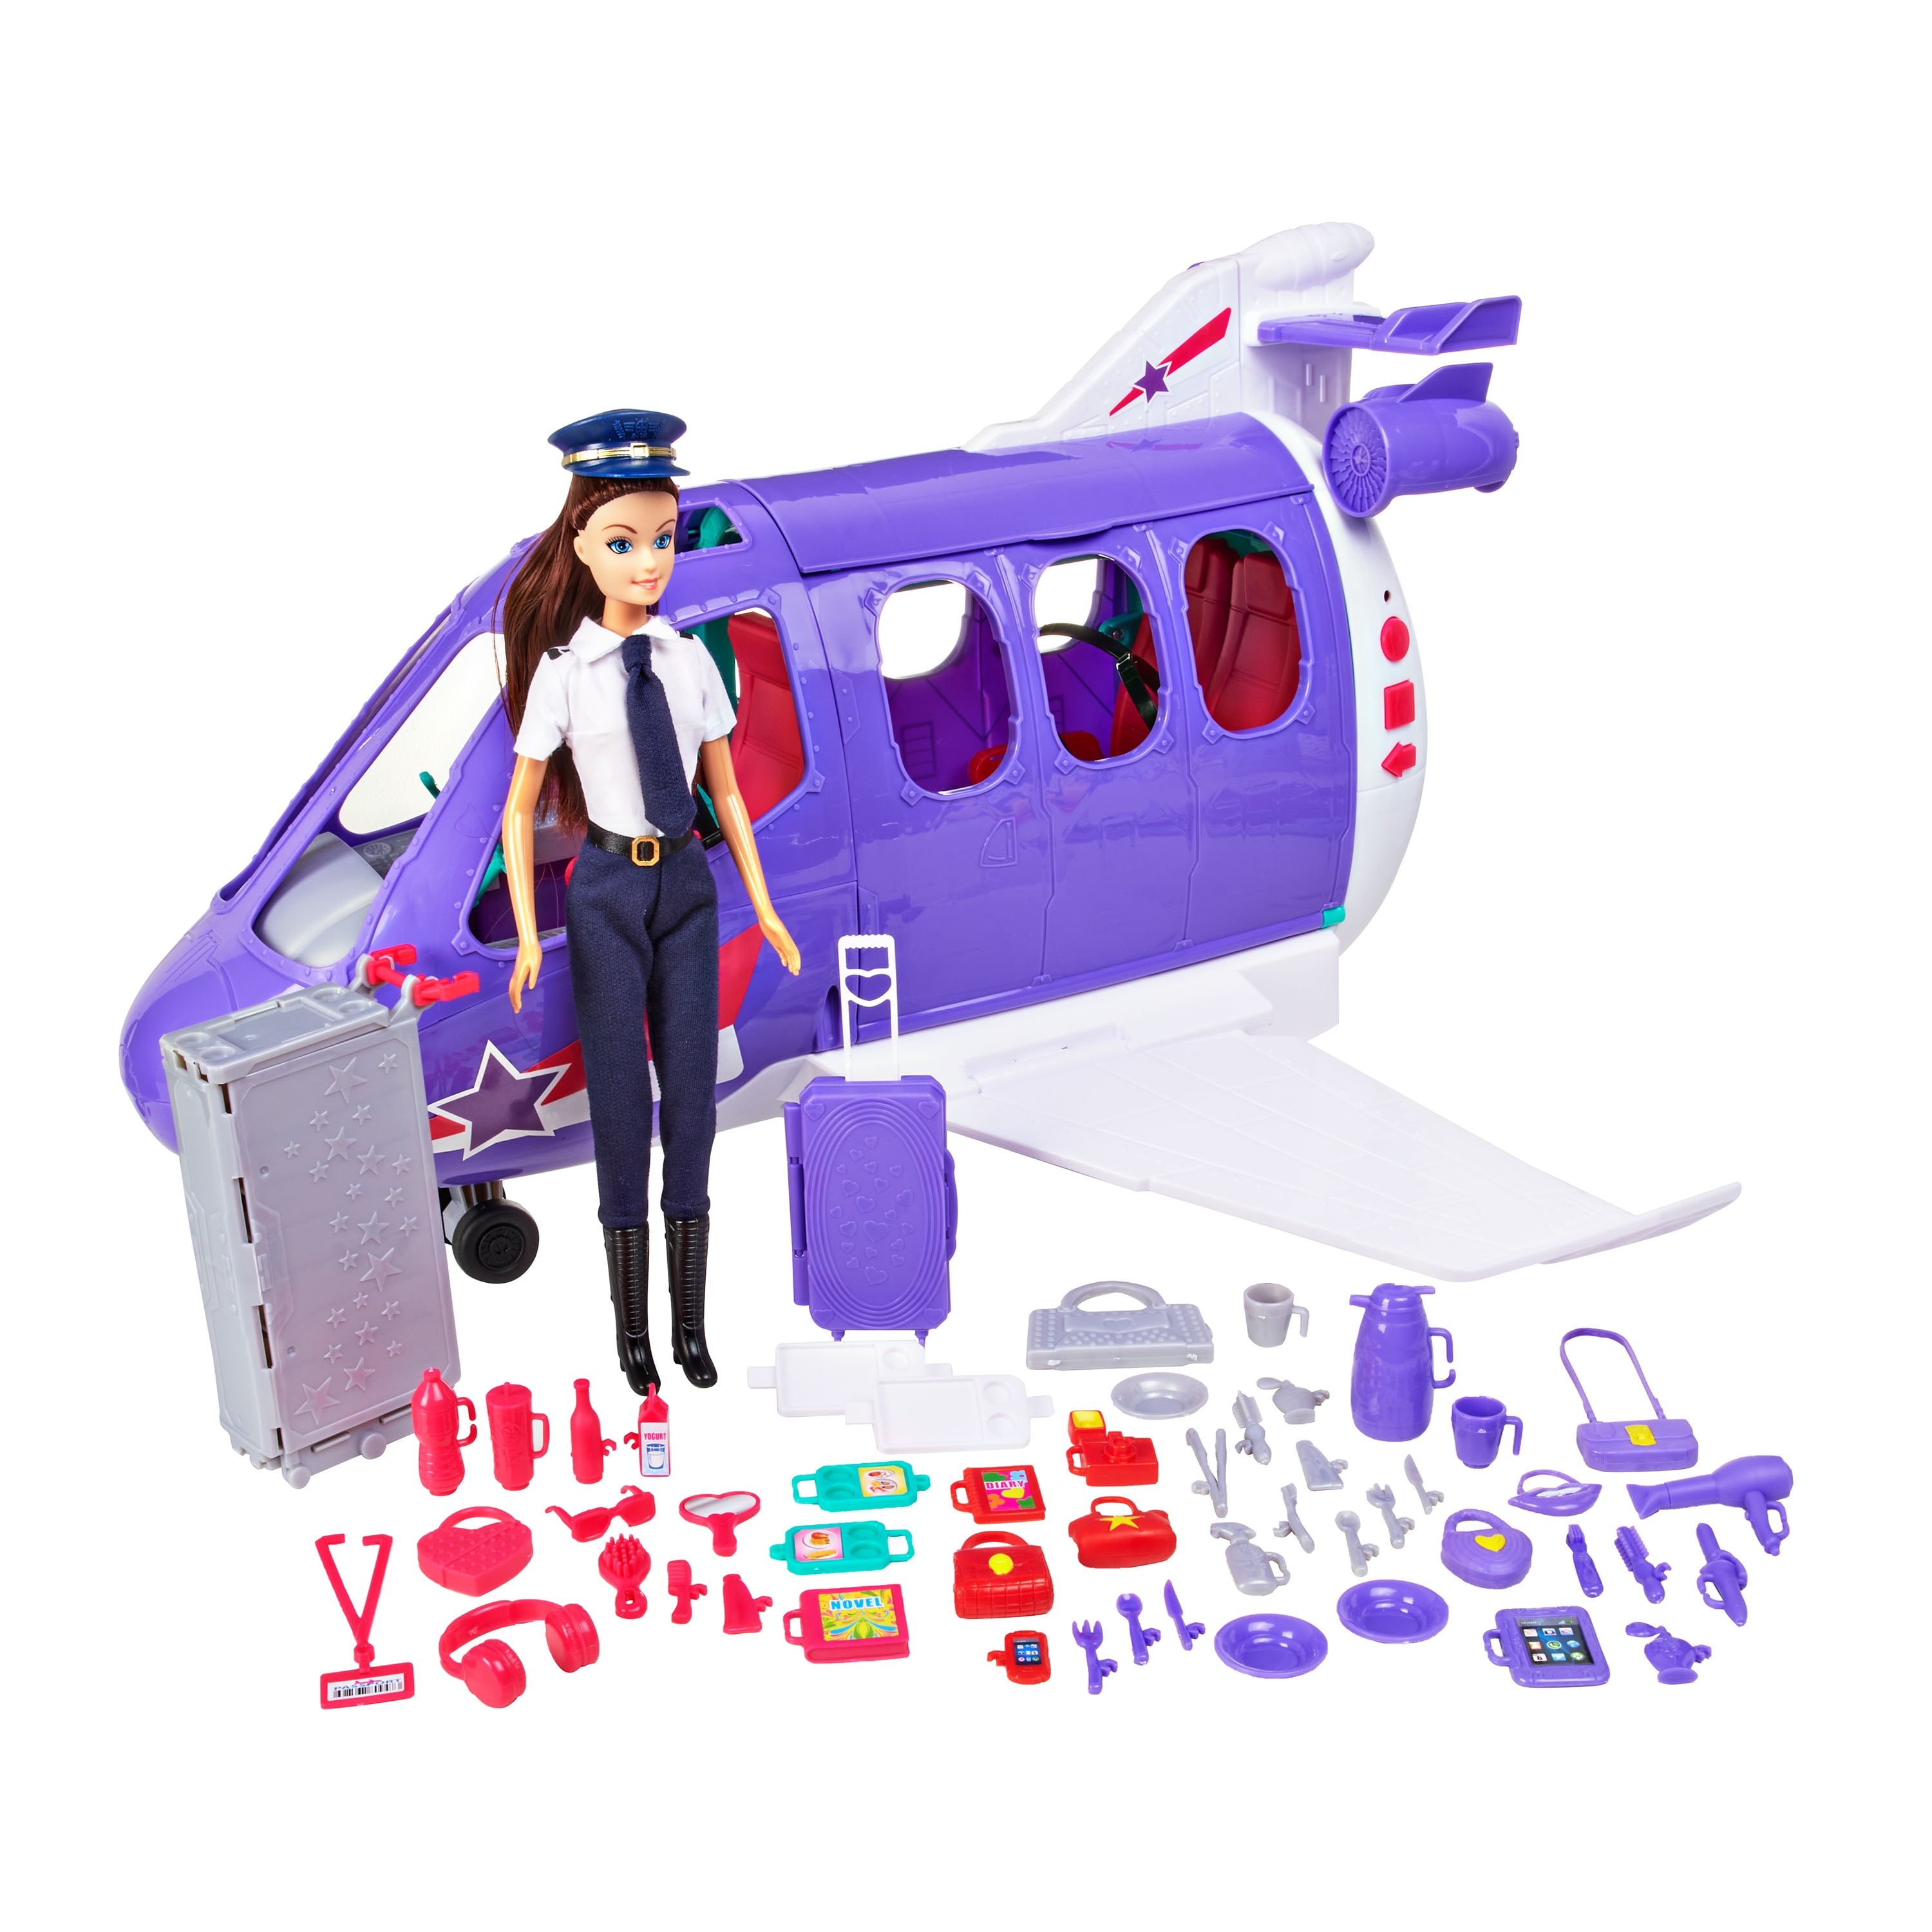 Barbie Plane Peaks for Young Girls: The 10 Greatest Barbie Airplane Playsets from the Past Decades Kids Adored